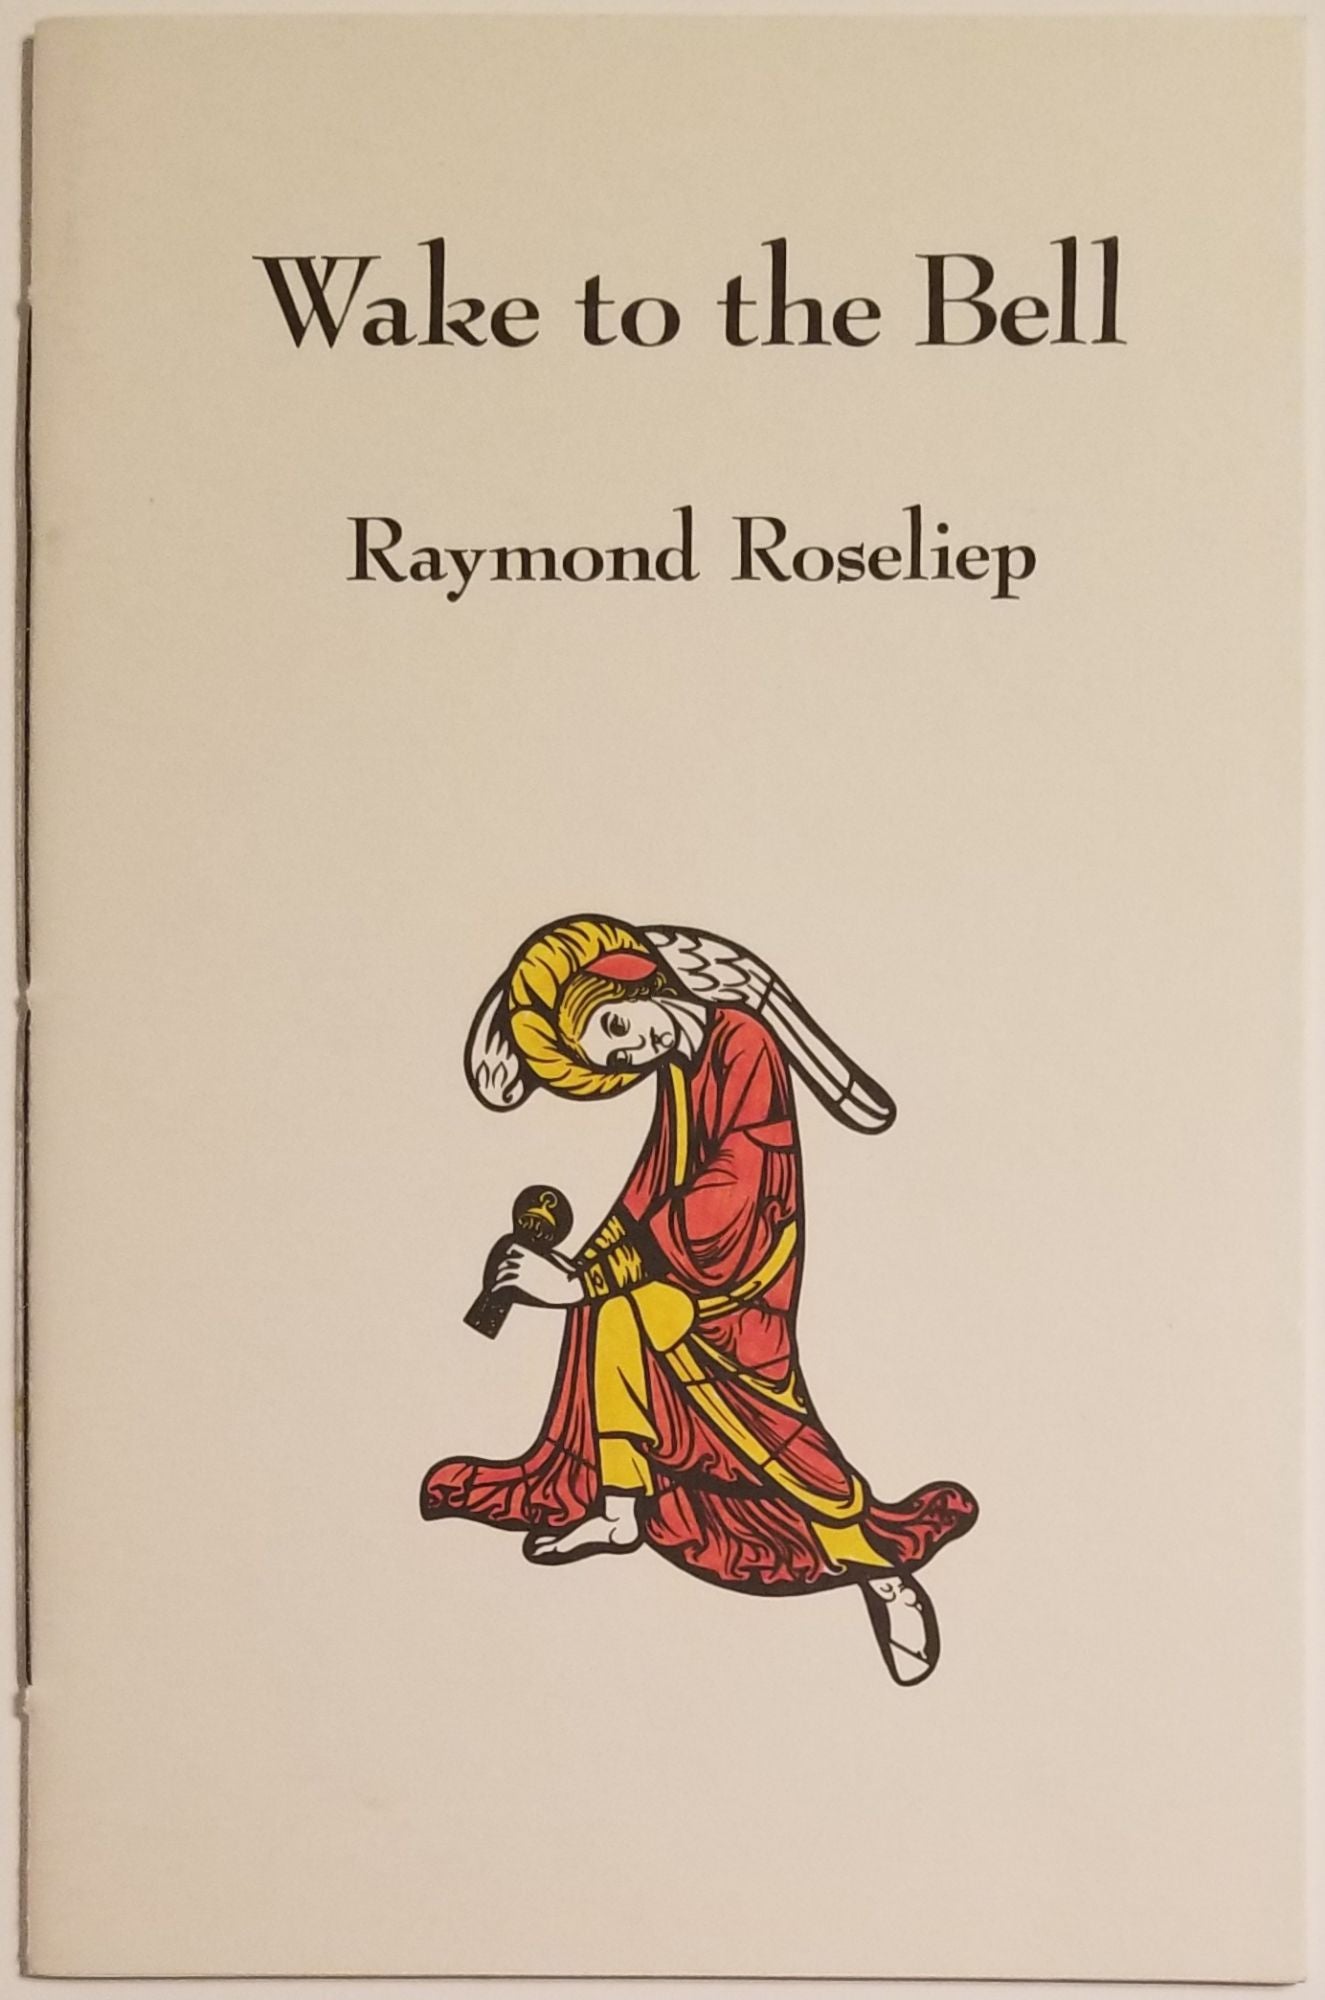 [Book #455] WAKE TO THE BELL: A Garland of Christmas Poems. Raymond Roseliep.